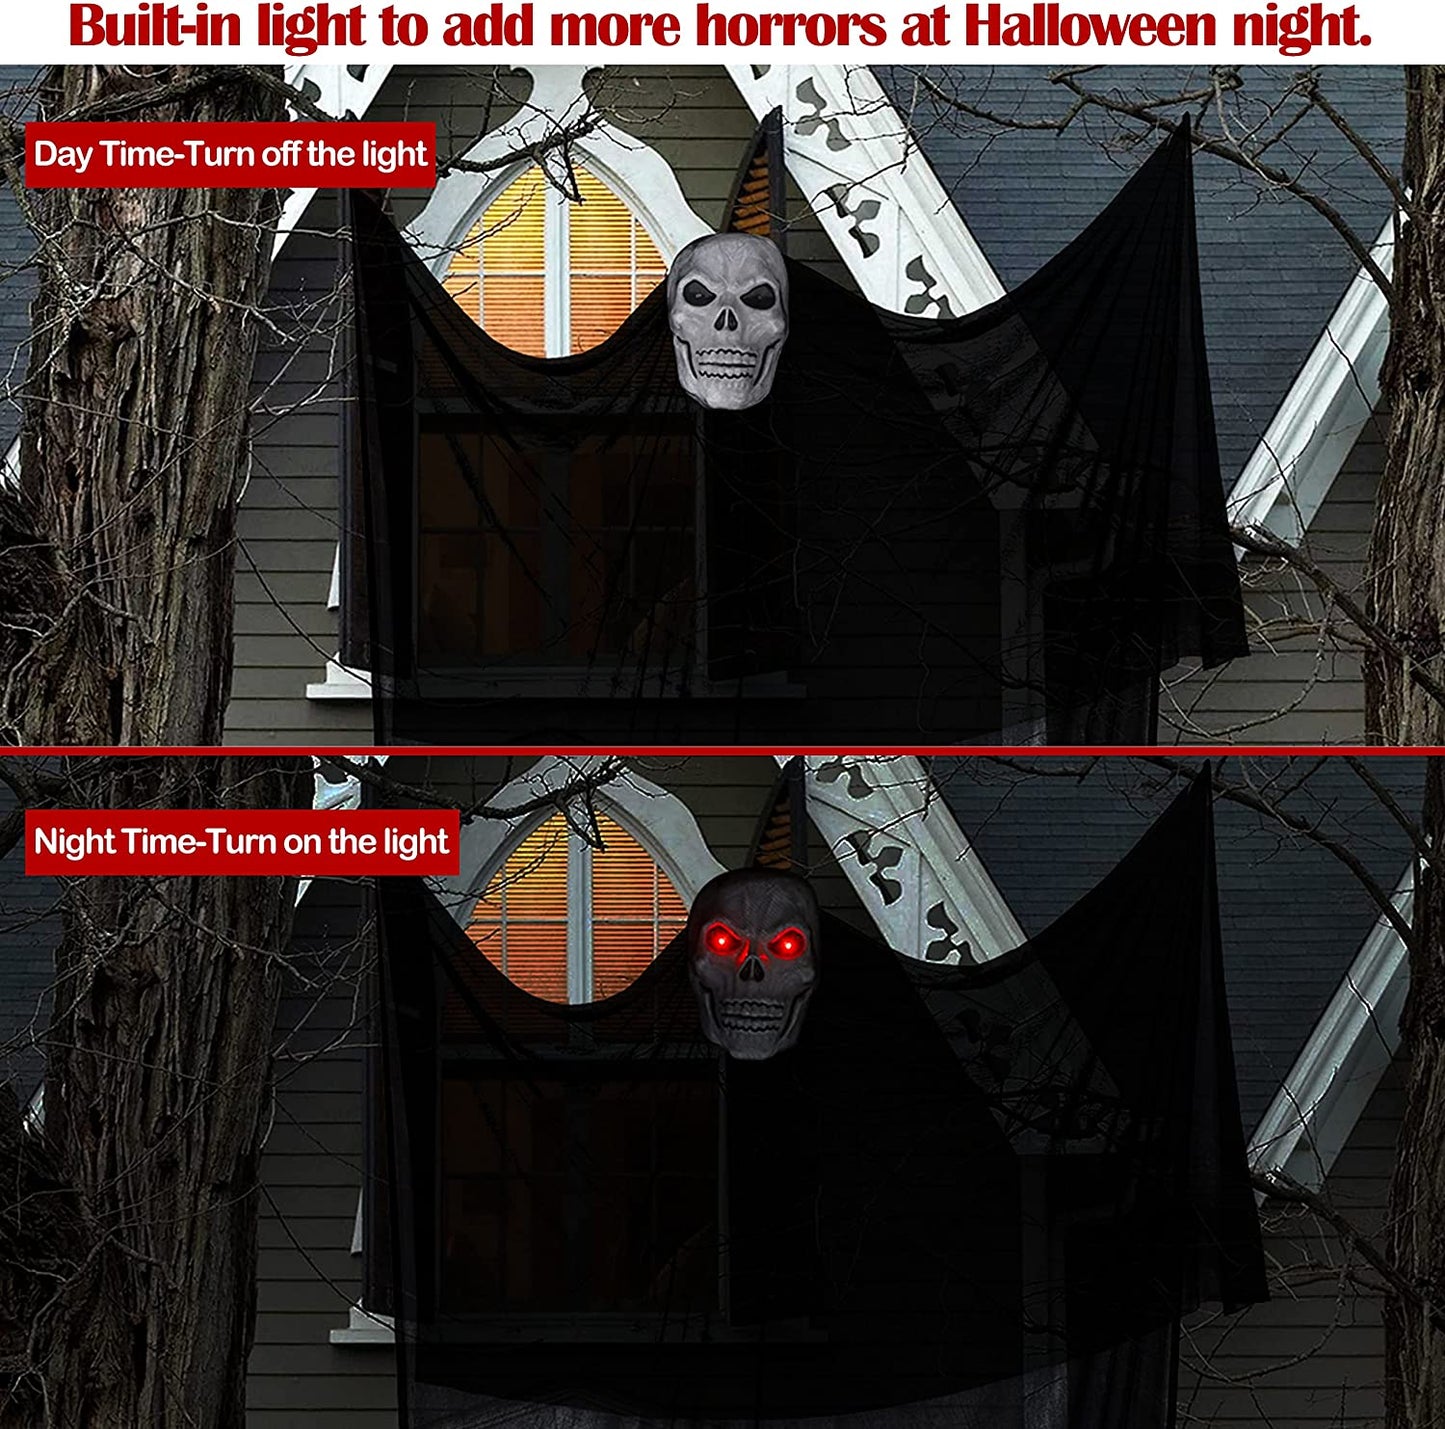 13.94Ft Halloween Ghost Hanging Activated Decorations with LED Light-Up Red Eyes&Voice, Scary Creepy Indoor Outdoor Decor(Batteries Not Included)